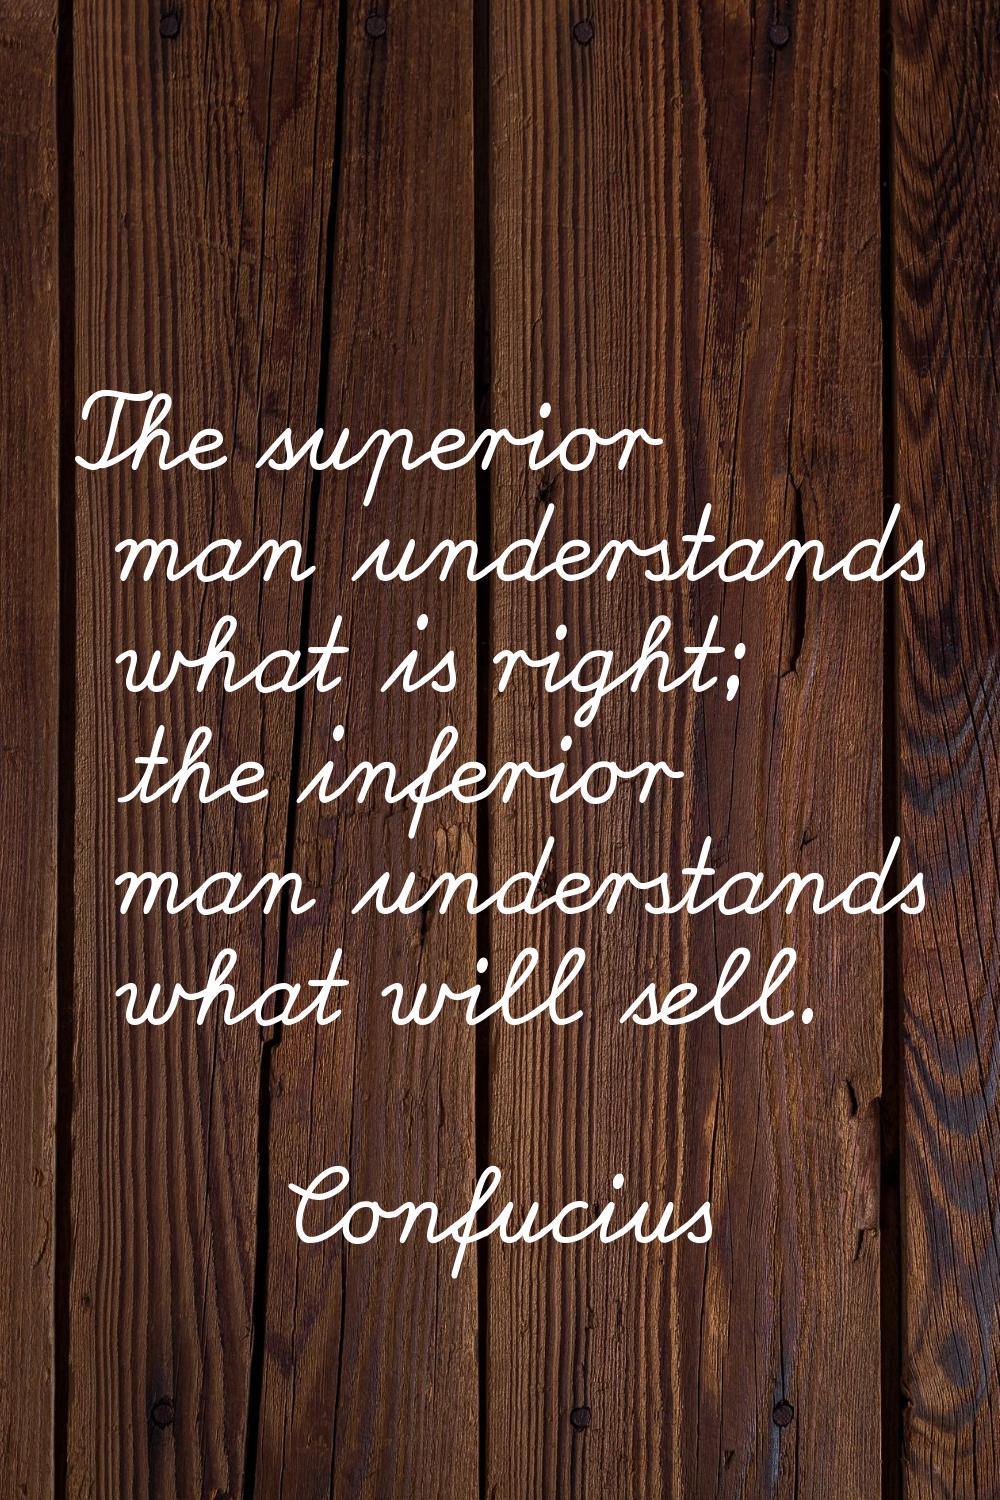 The superior man understands what is right; the inferior man understands what will sell.